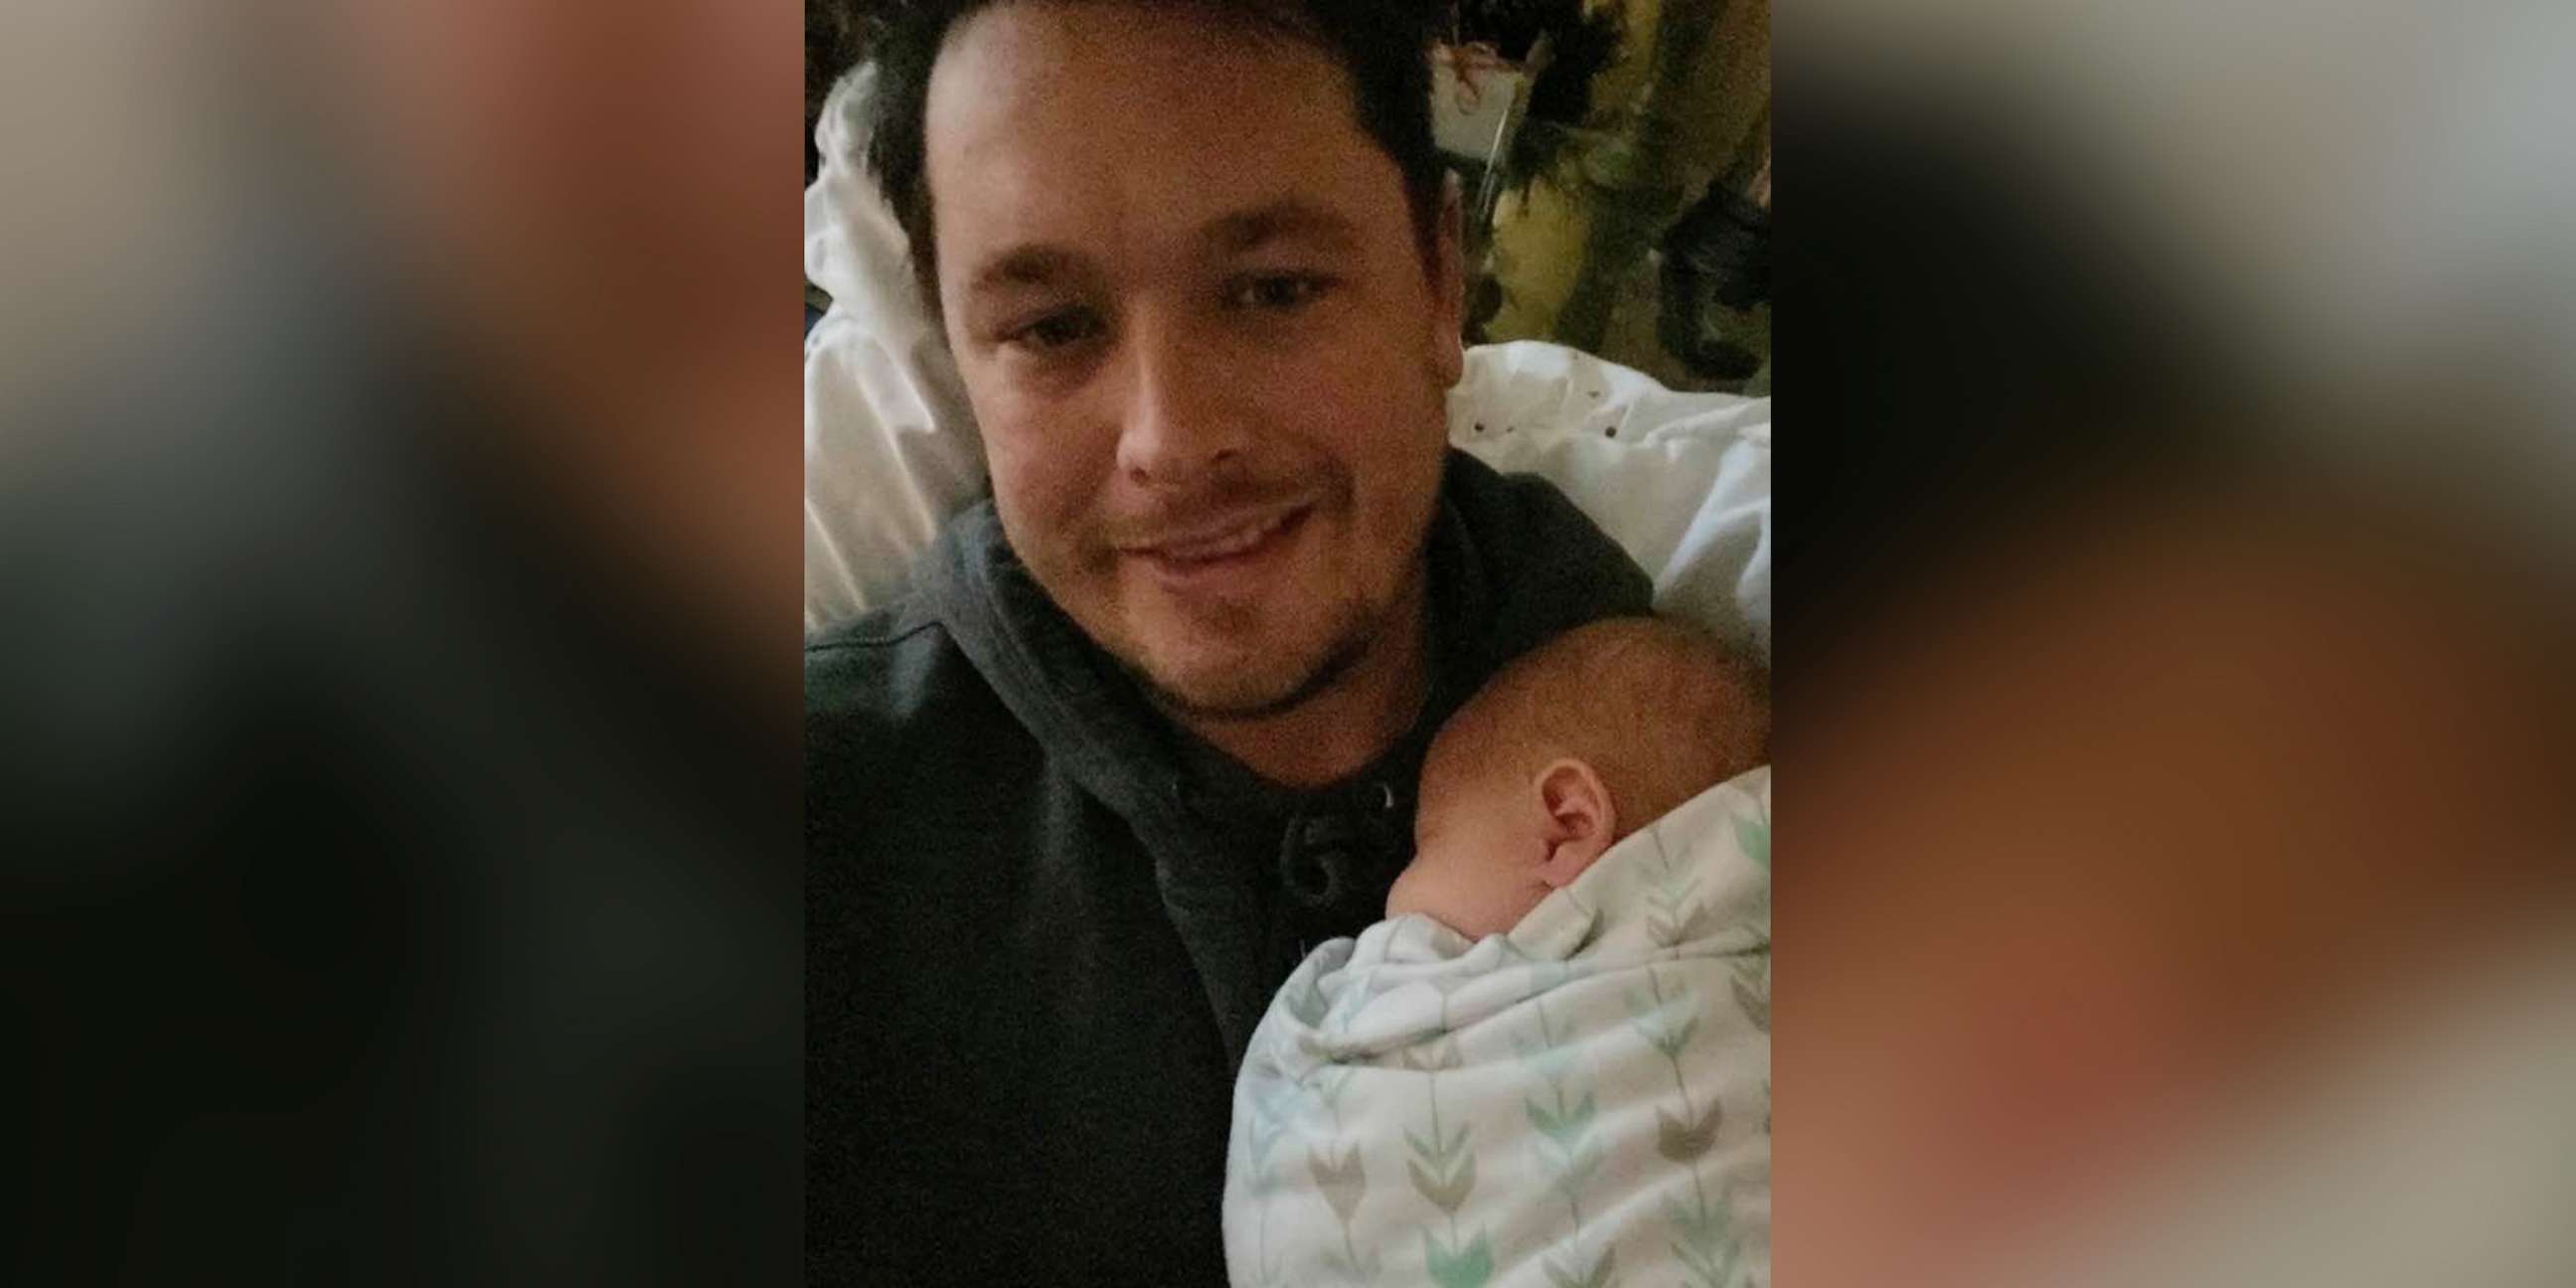 PHOTO: Shane Carey and his daughter, Margot. Carey posted the photo to Facebook on Dec. 24, 2019.